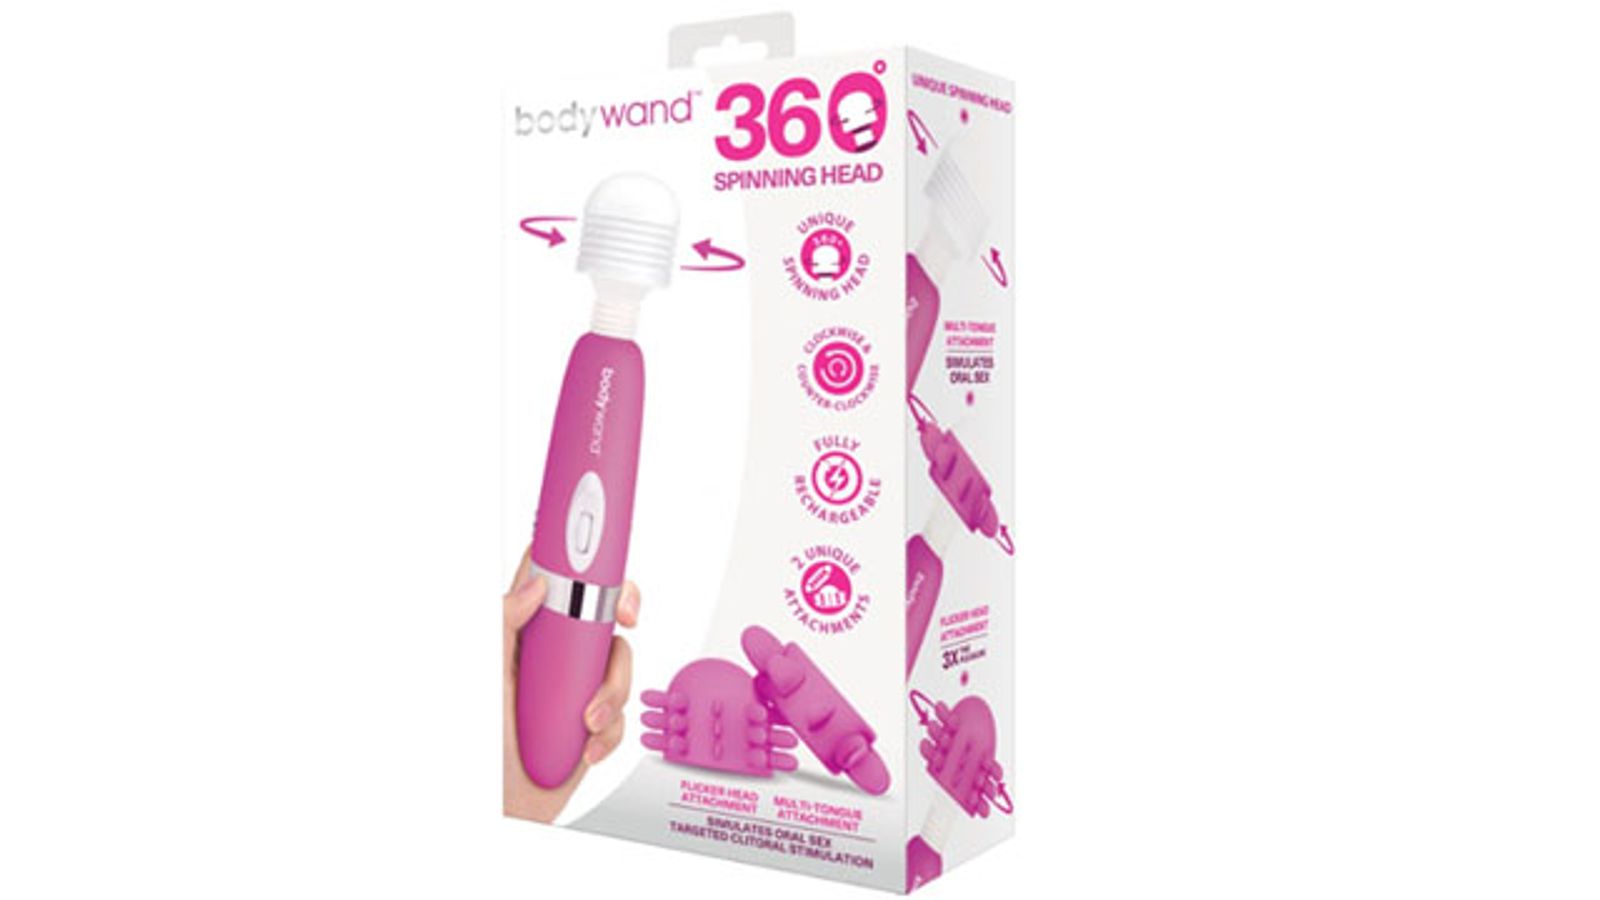 Xgen Products Announces Debut Of Bodywand 360